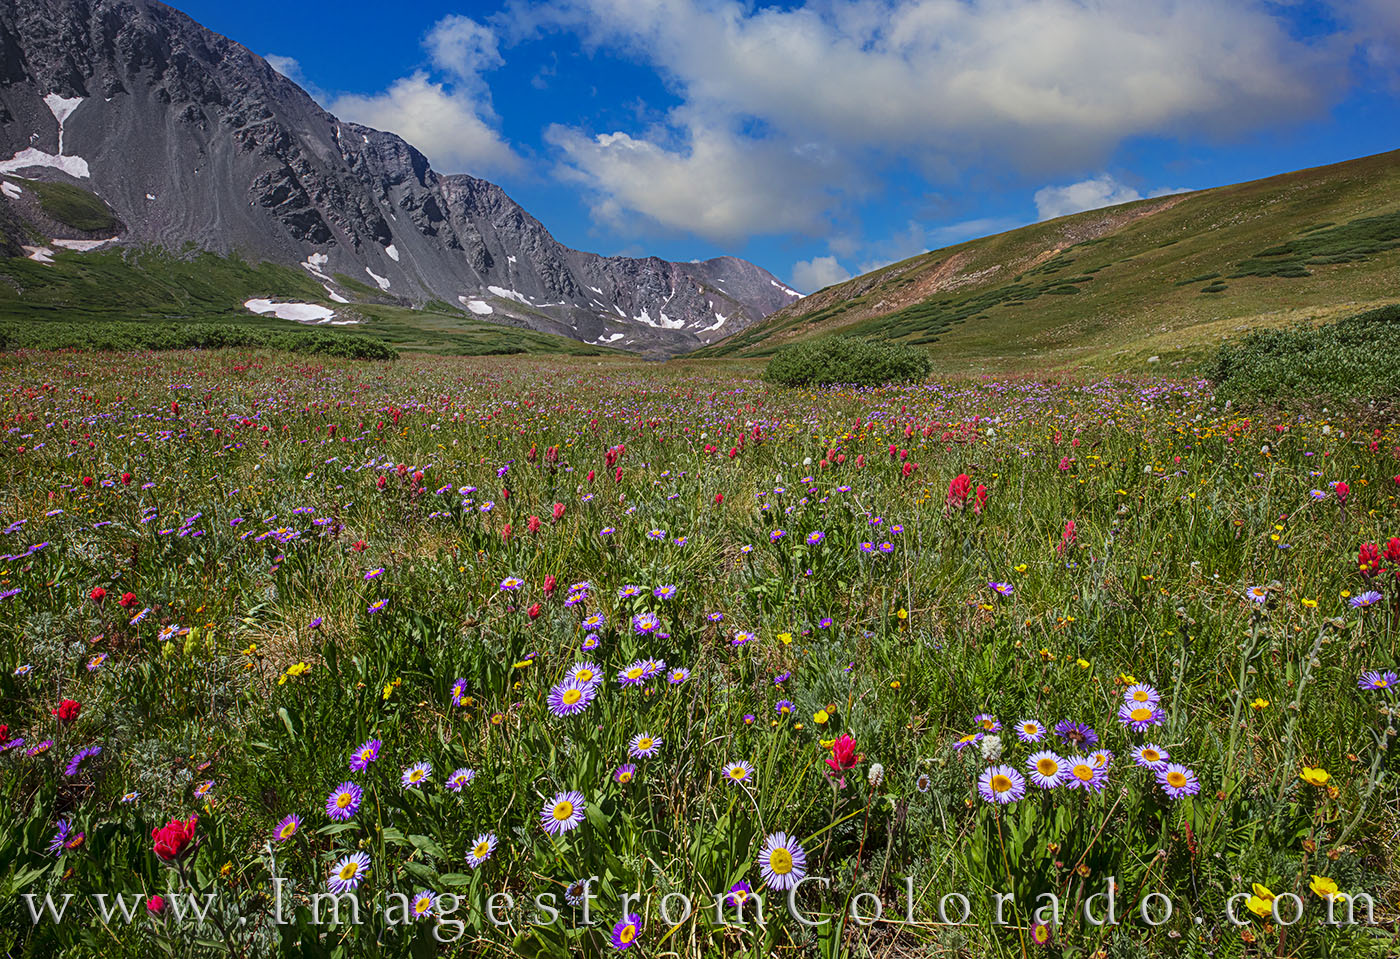 With Grays Peak (14,270') in the distance, the wildflowers in Stevens Gulch and along the Grays Peak Trail add an explosion of...